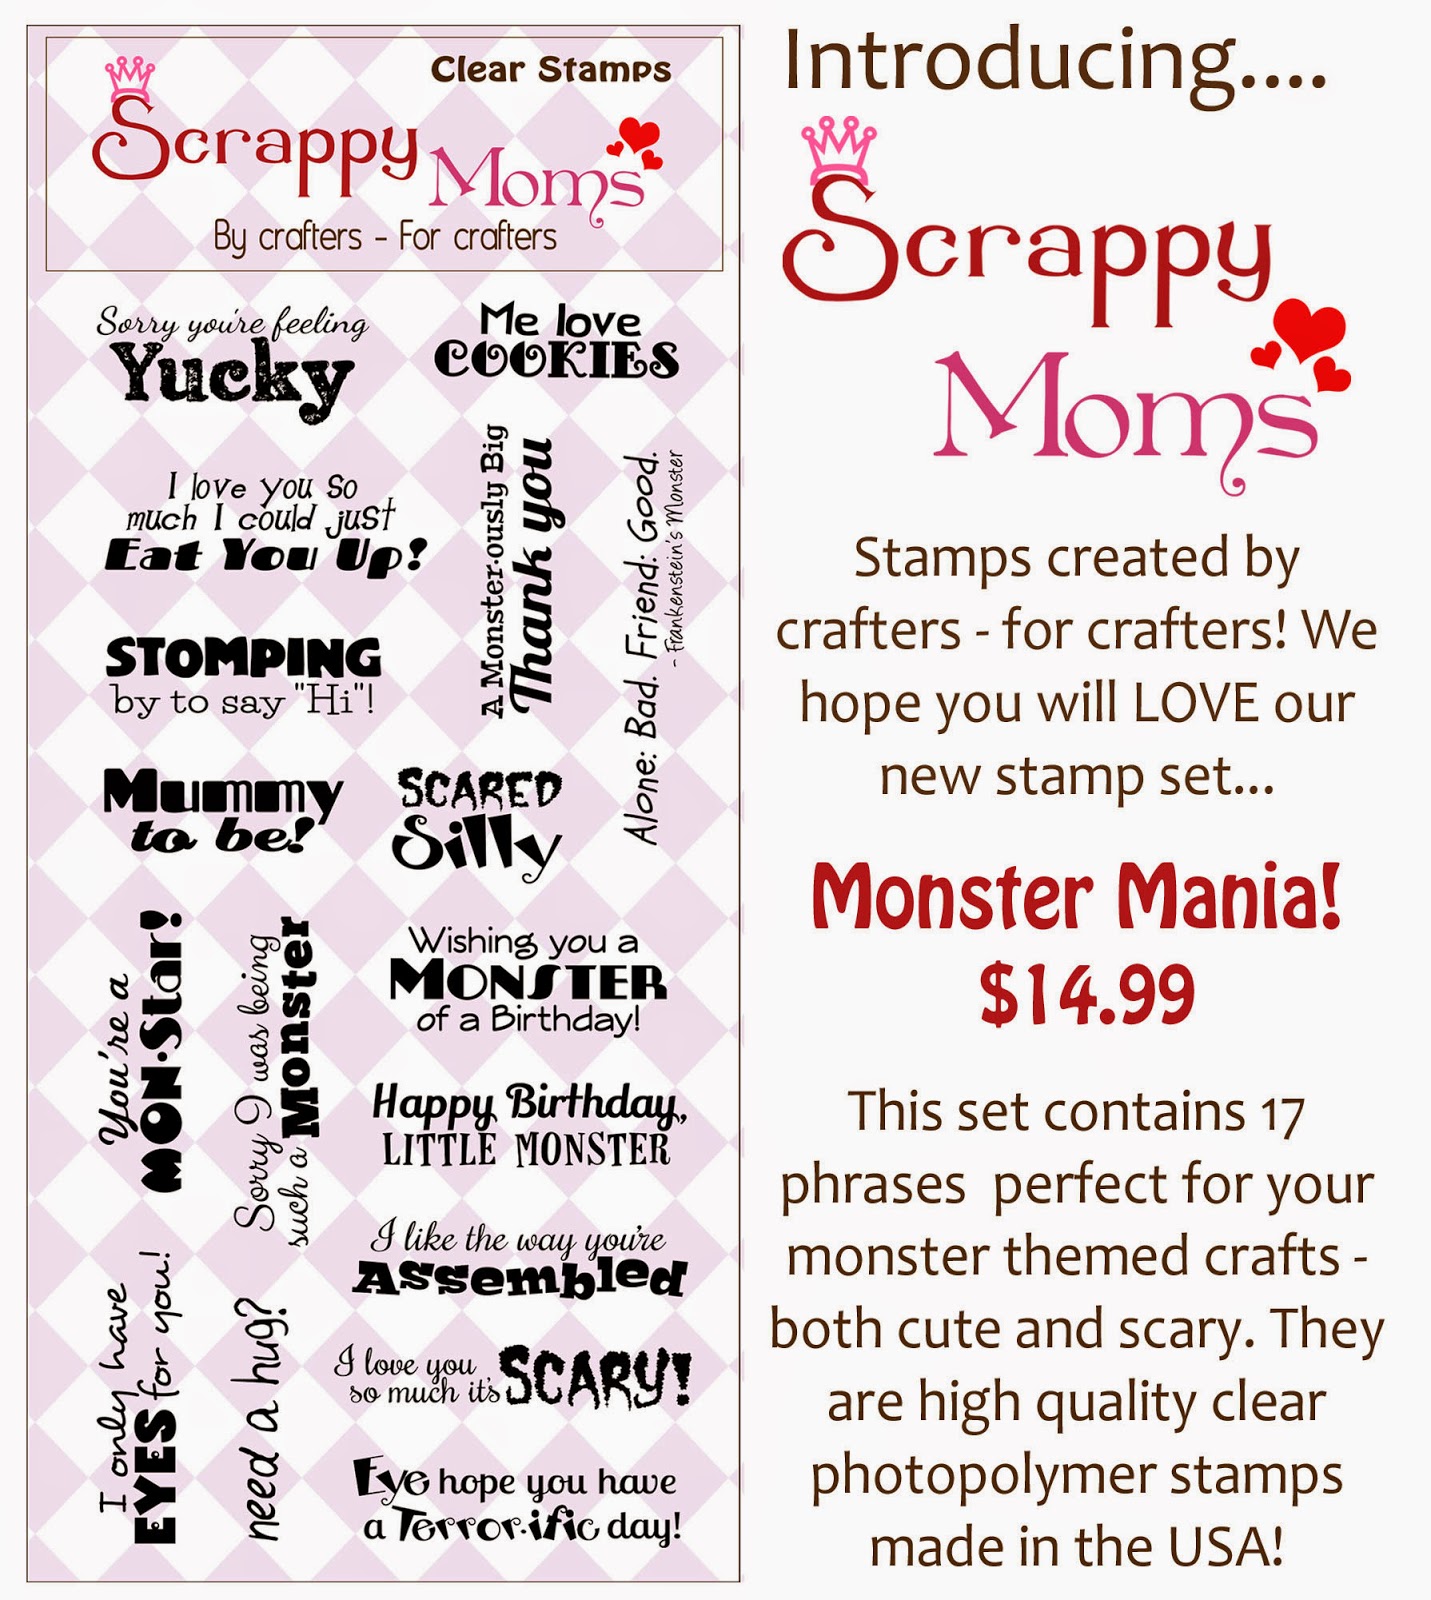 http://scrappymoms-stamps-store.blogspot.com/2010/01/newest-stamp-sets.html